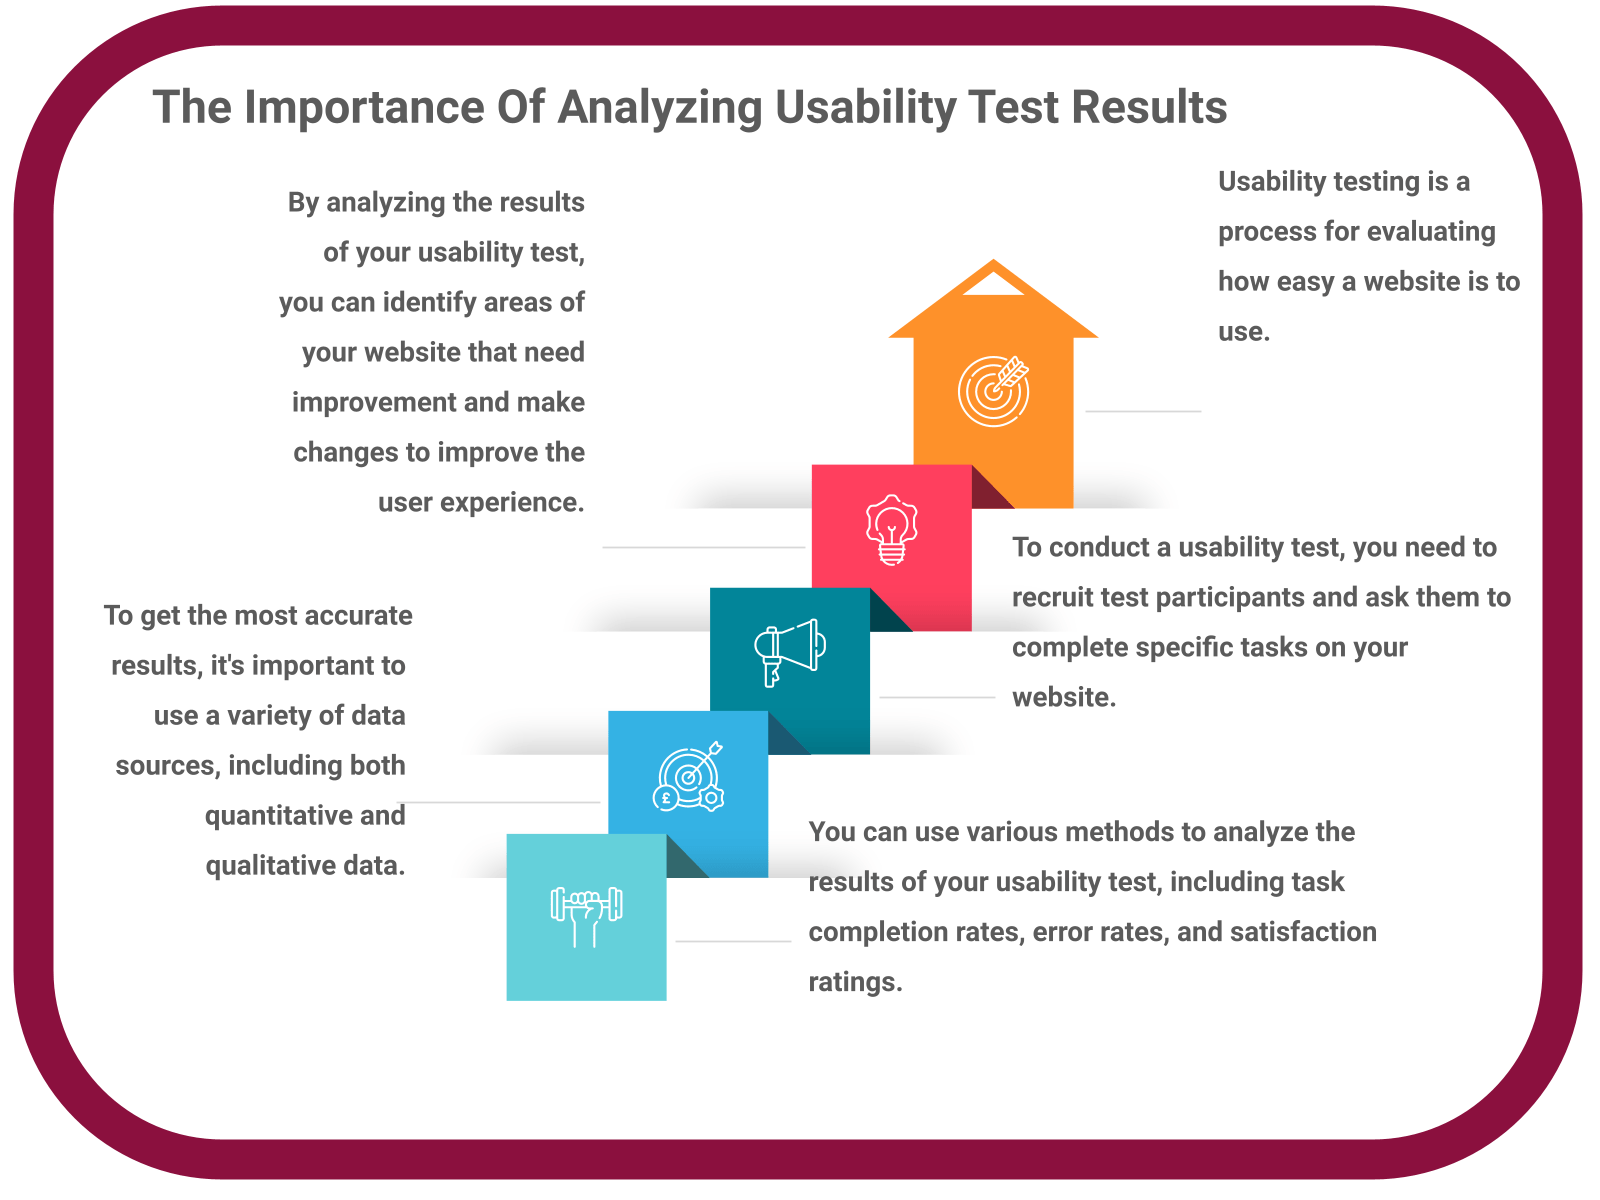 INFOGRAPHIC: The Importance Of Analyzing Usability Test Results - Poll the People